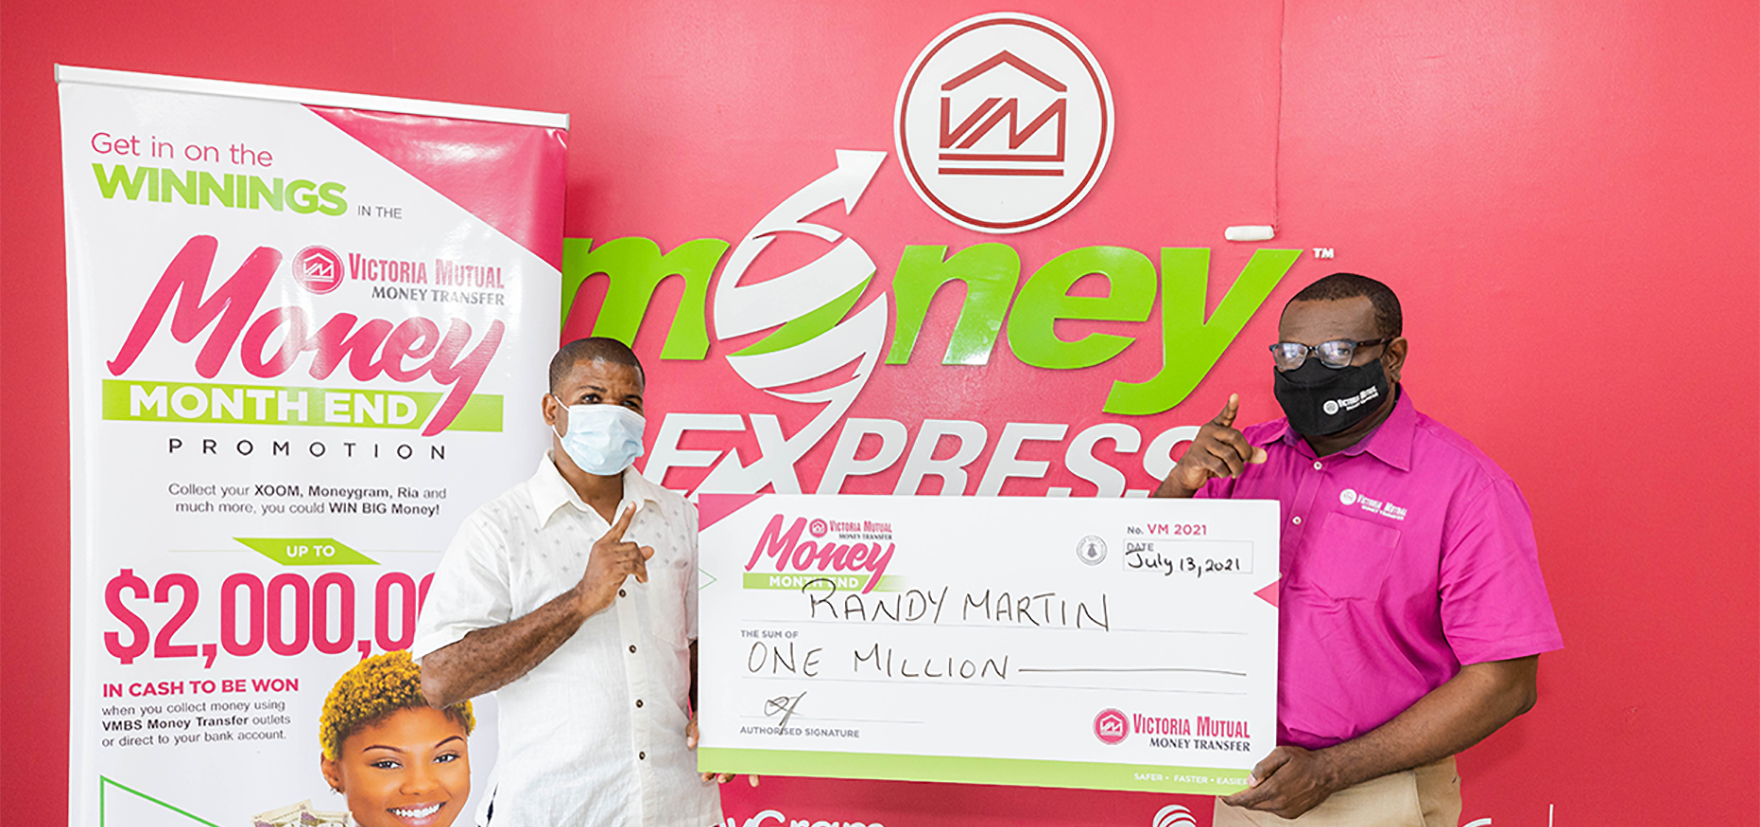 Randy Martin: Michael Howard (right), CEO, VM Money Transfer Services (VMTS), presents Randy Martin, grand prize winner of the VMTS Month End promotion with a cheque of $1 million dollars, at the VM Money Express Shop in Savanna-la-Mar, on July 13, 2021.